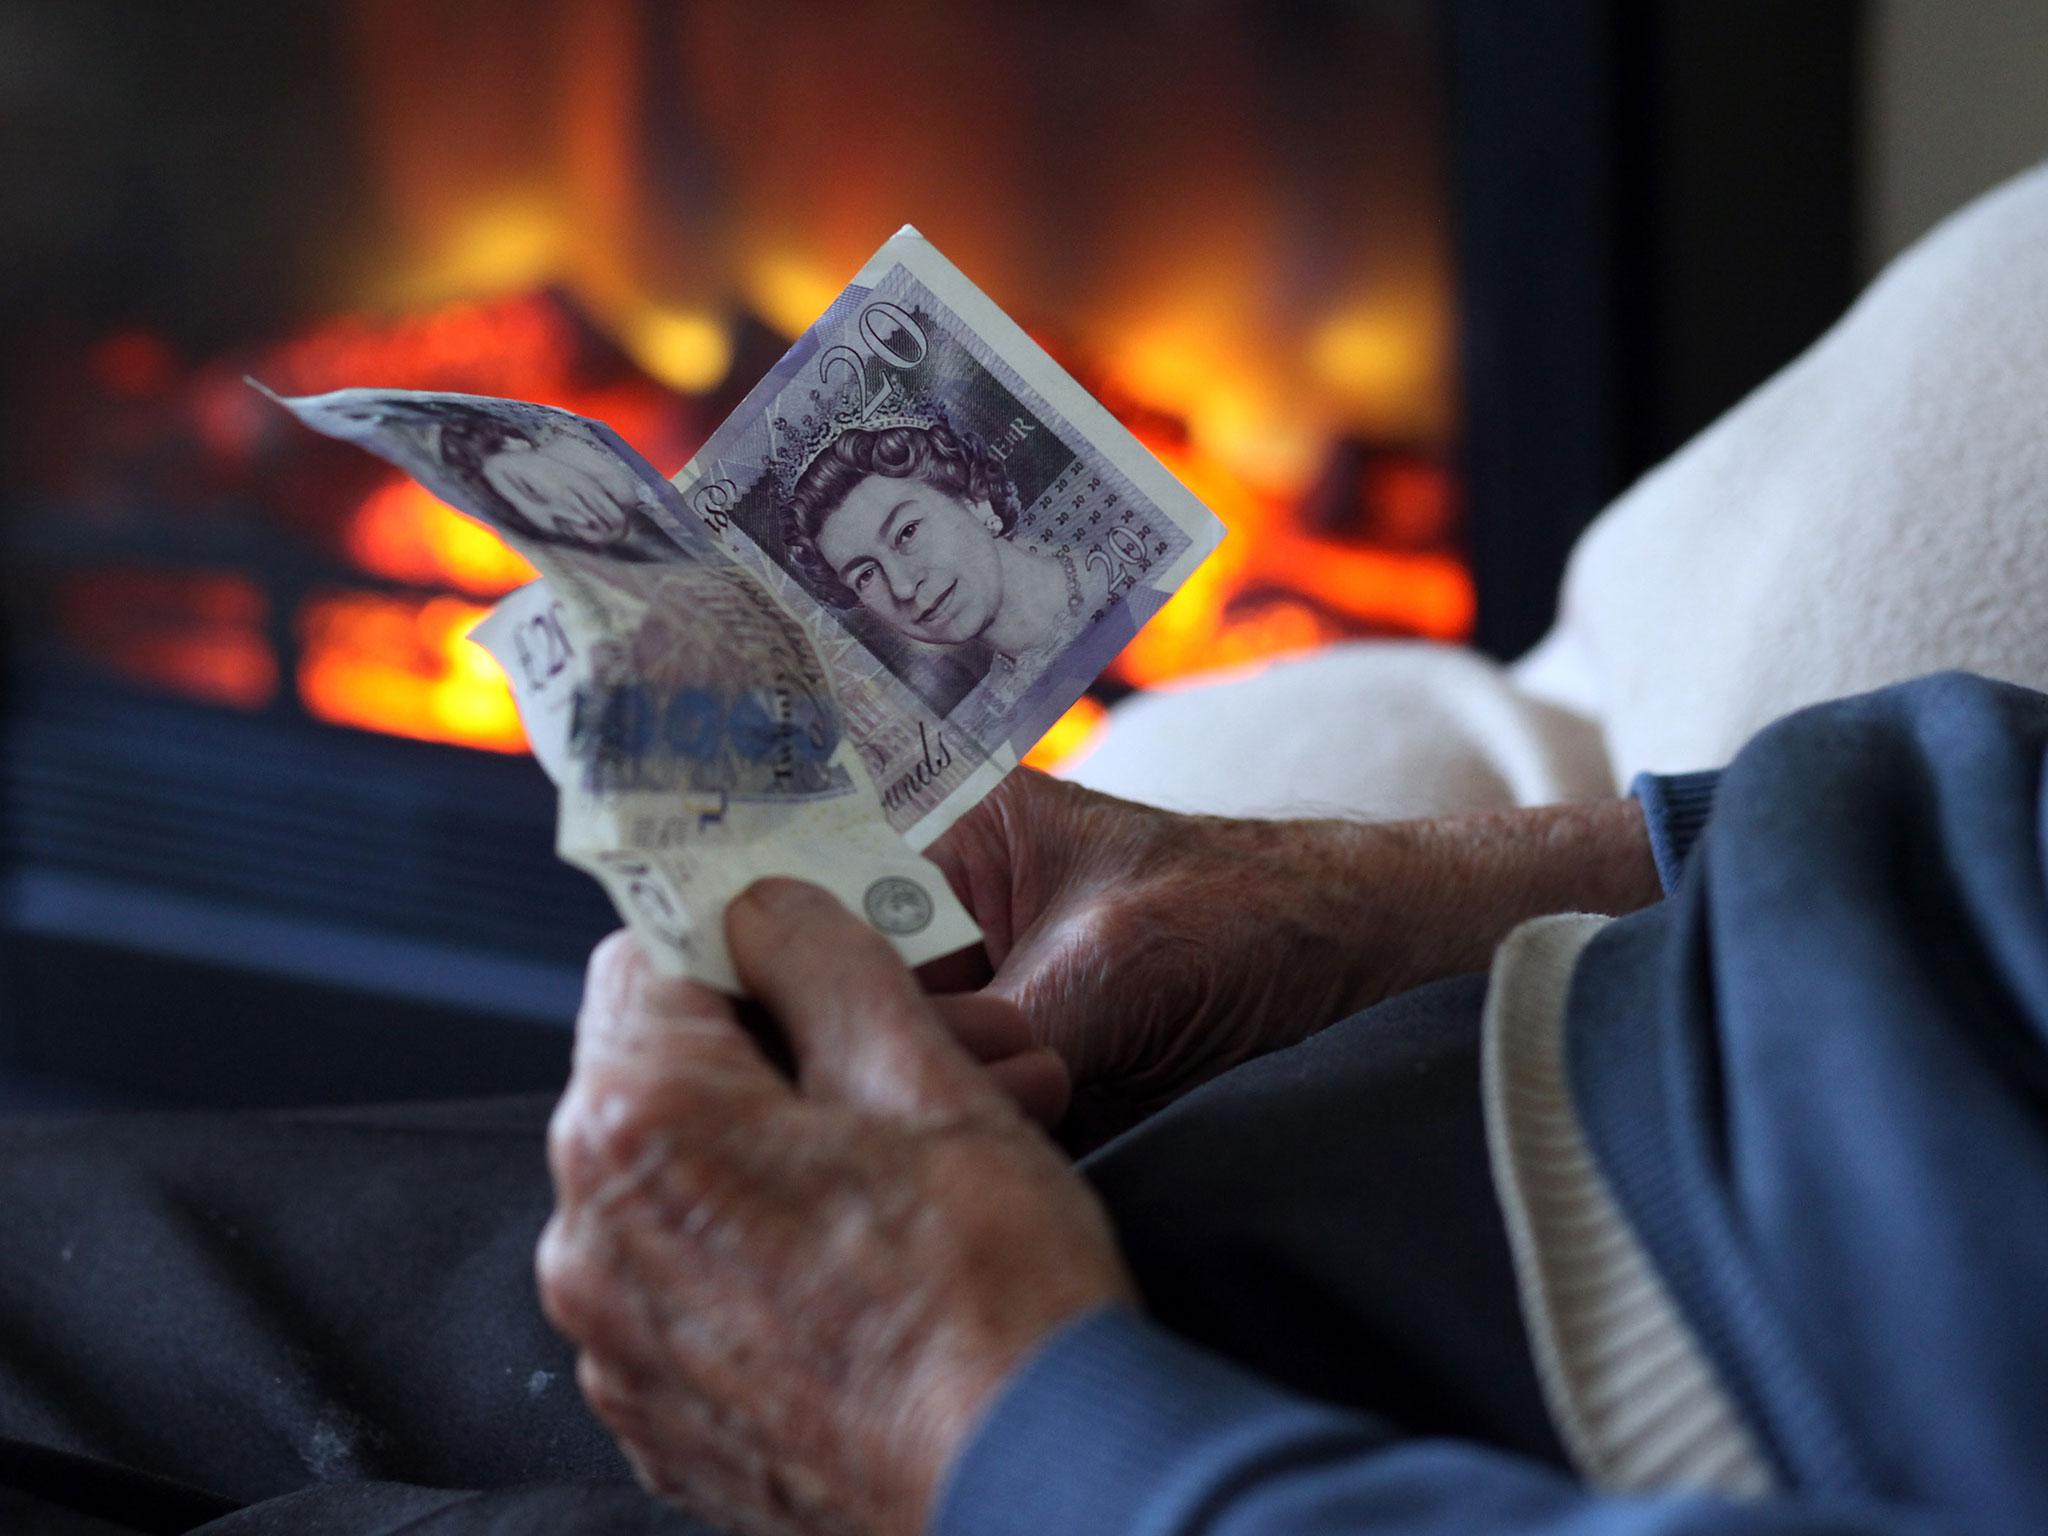 Fuel poverty campaigners have calculated that the number of “excess” deaths surged last winter to 49,260